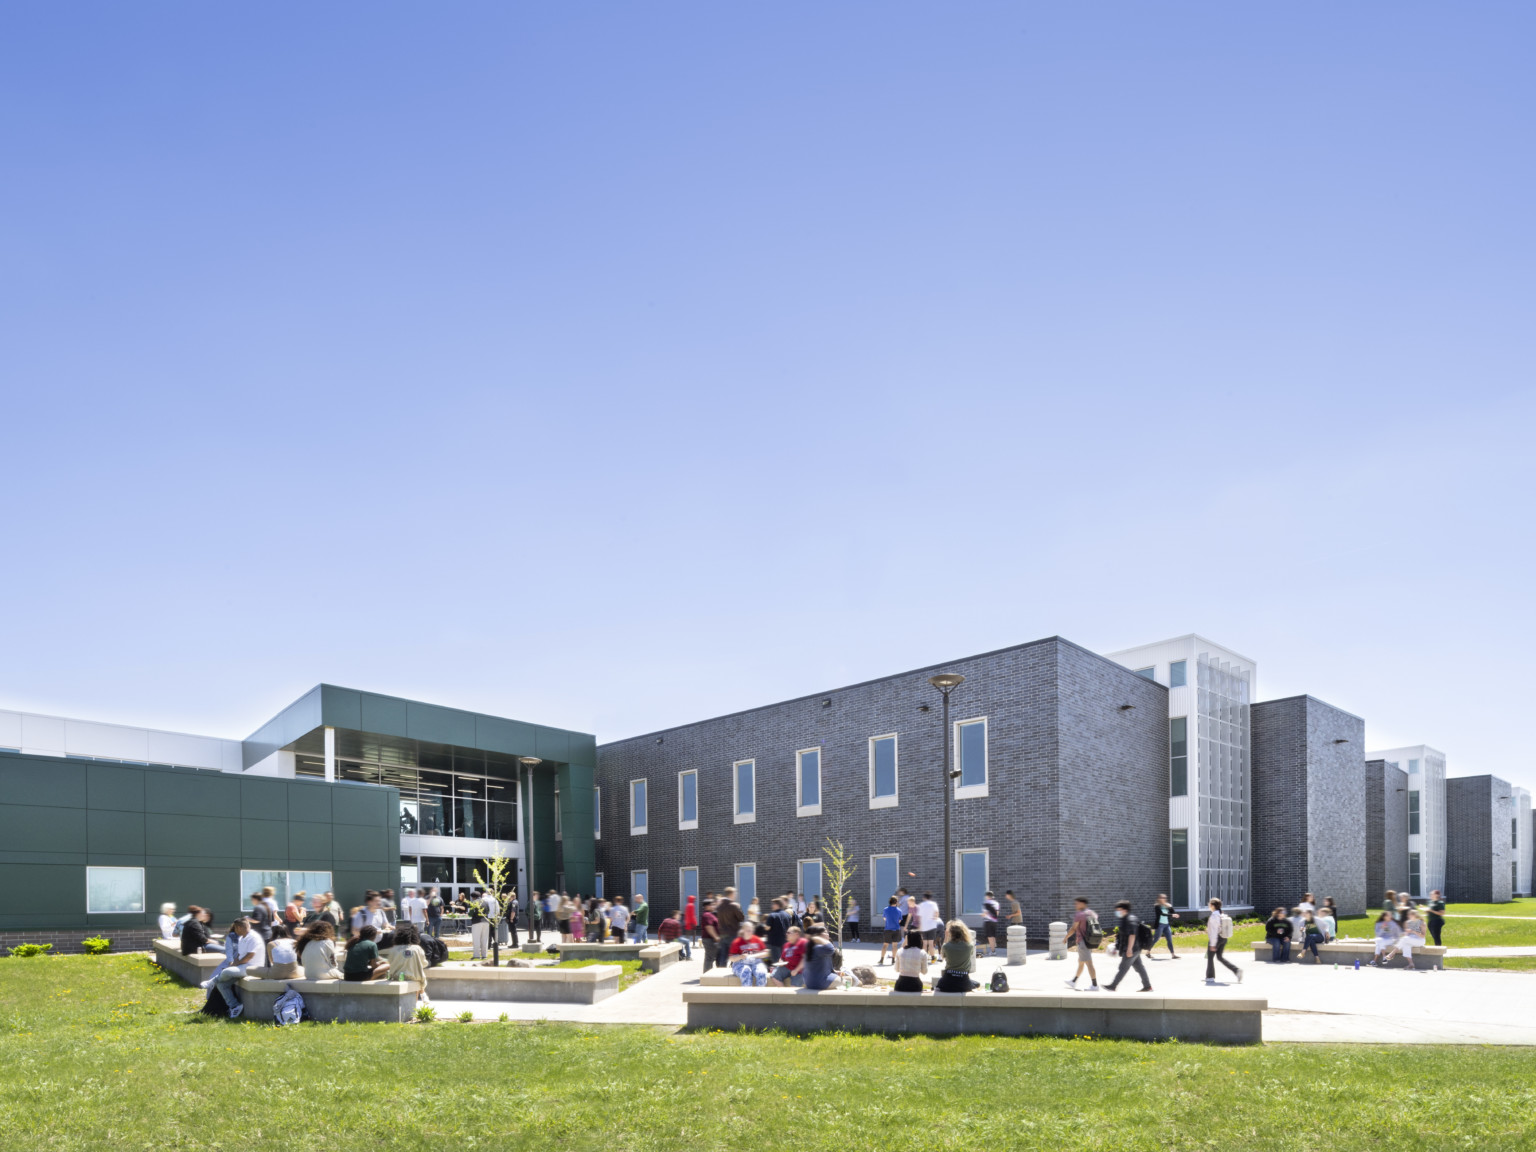 Exterior courtyard of Sioux Falls' Jefferson High School with wrapped facade square entry